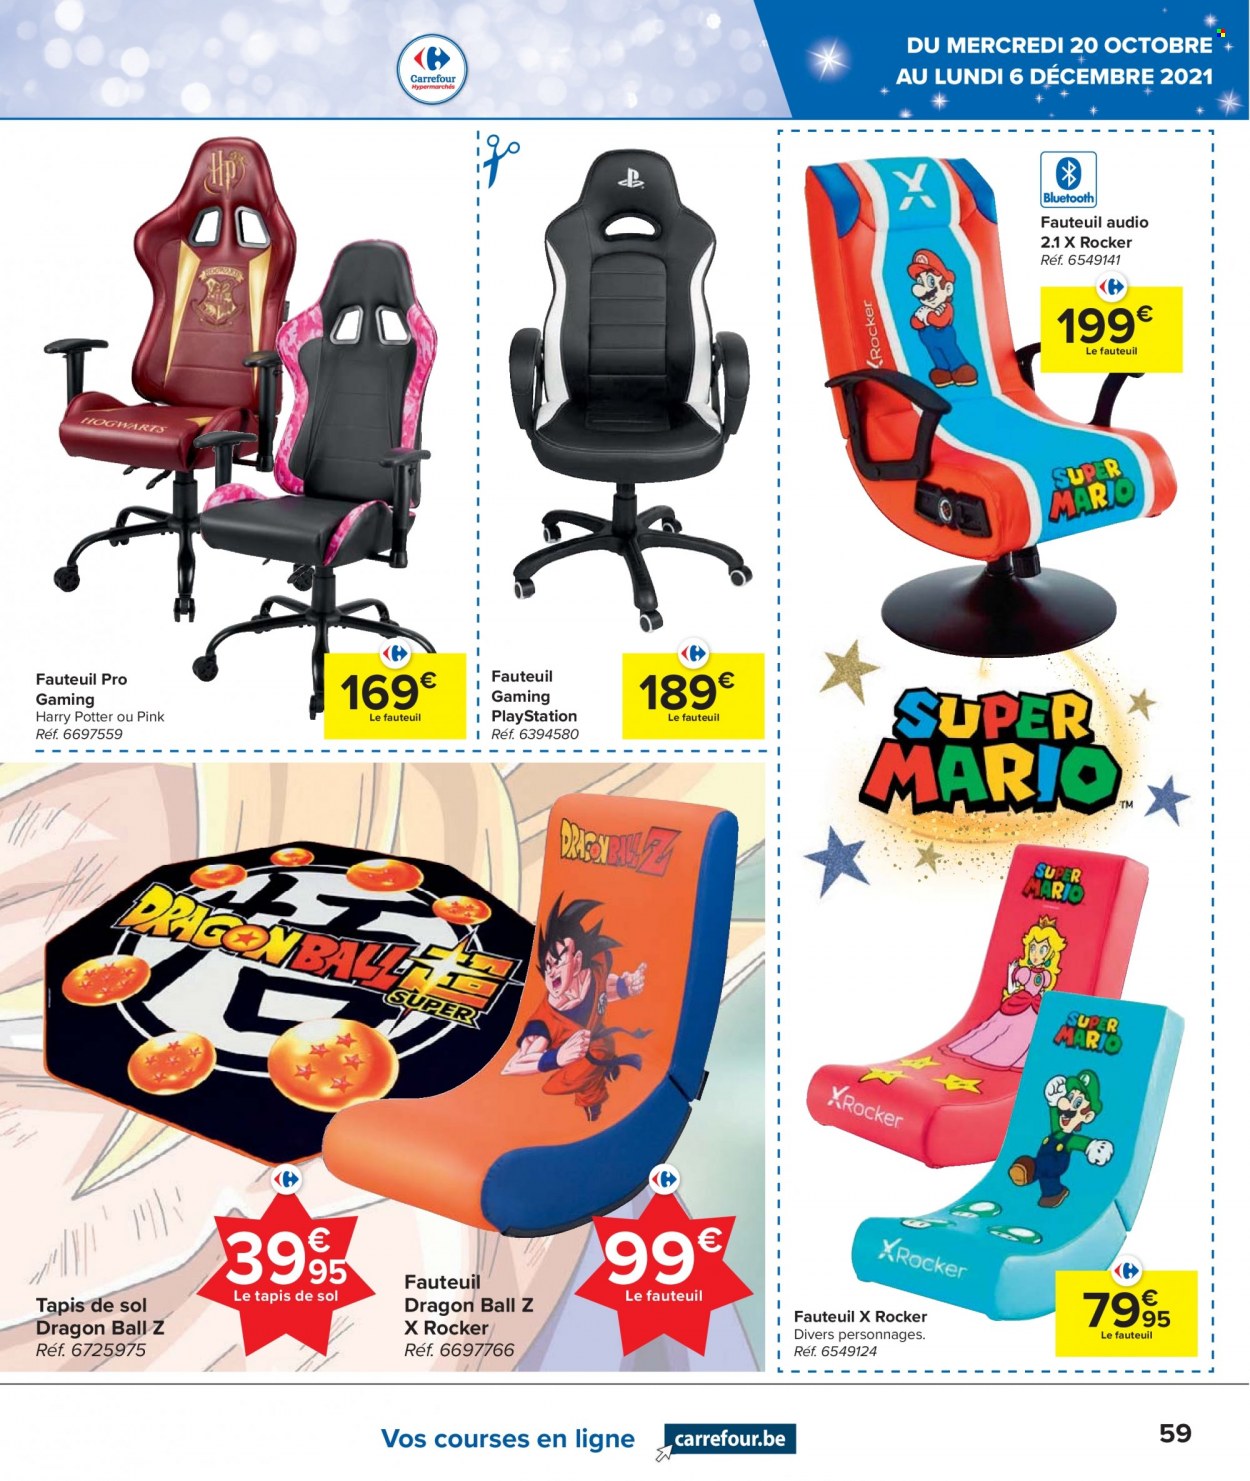 Catalogue Carrefour hypermarkt - 20.10.2021 - 6.12.2021. Page 59.